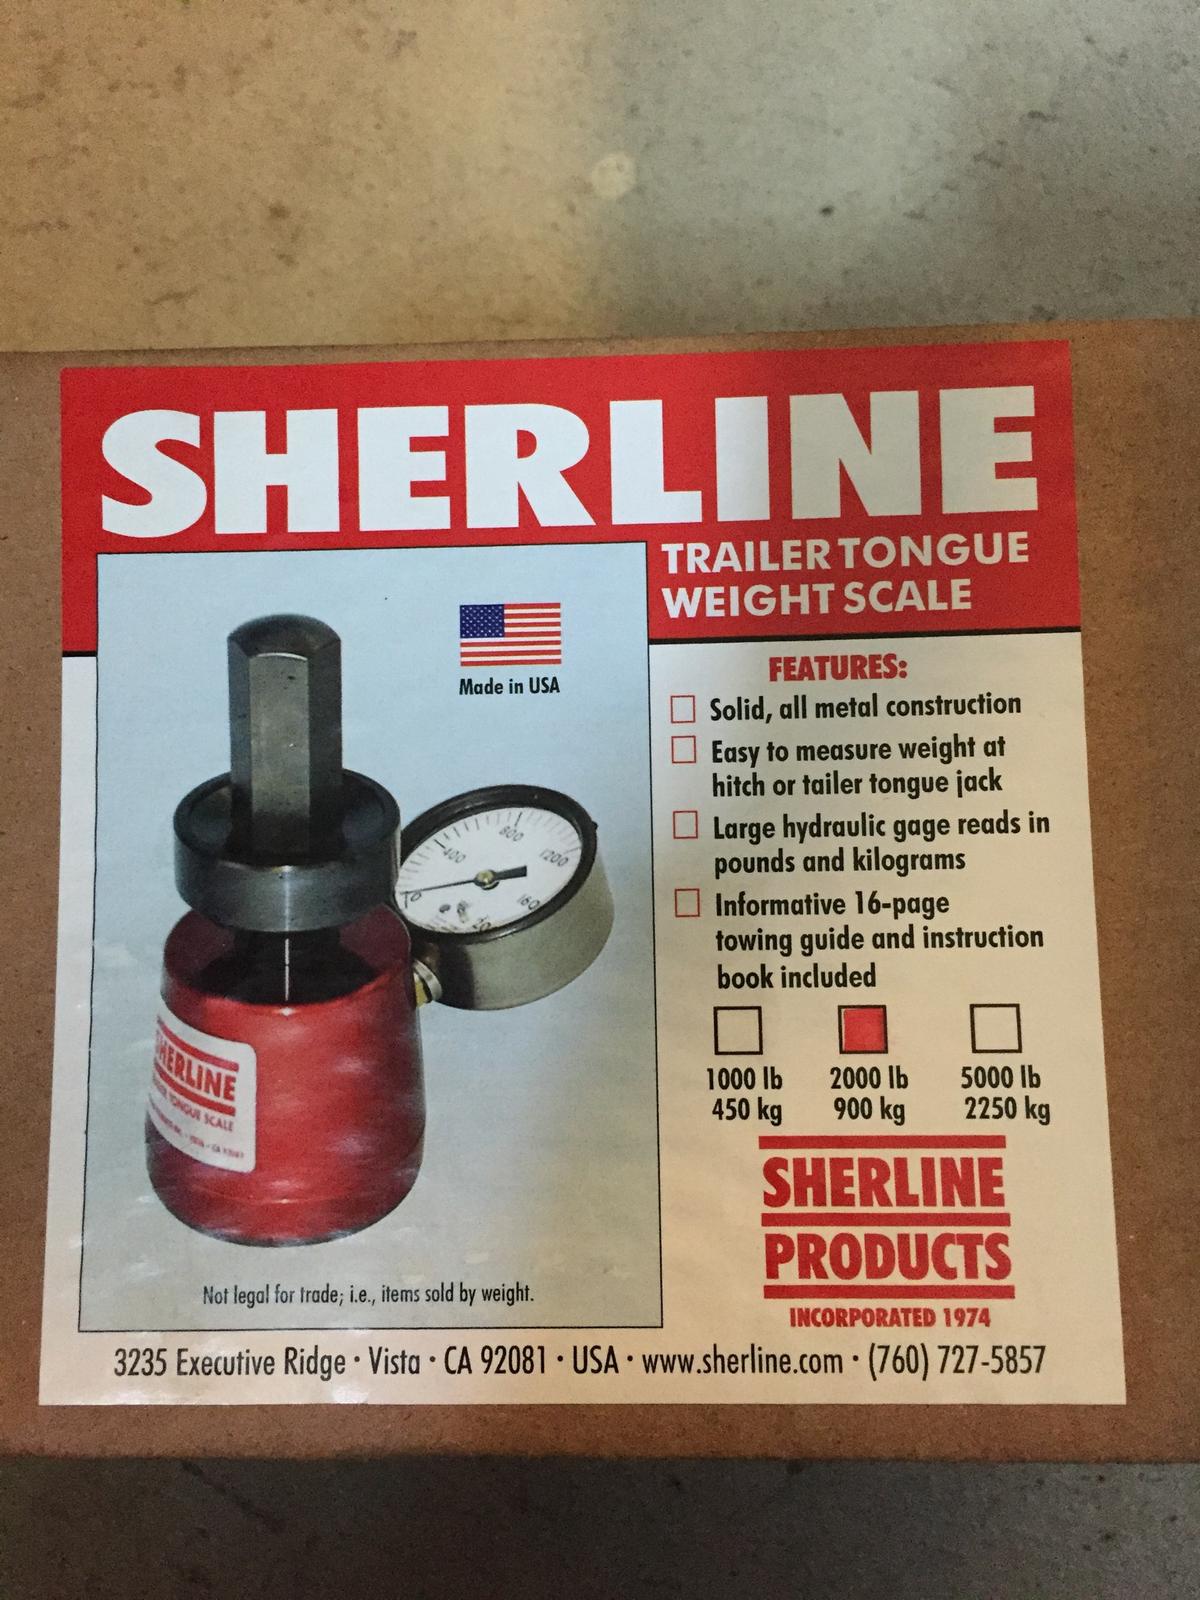 Sherline Trailer Tongue Weight Scale